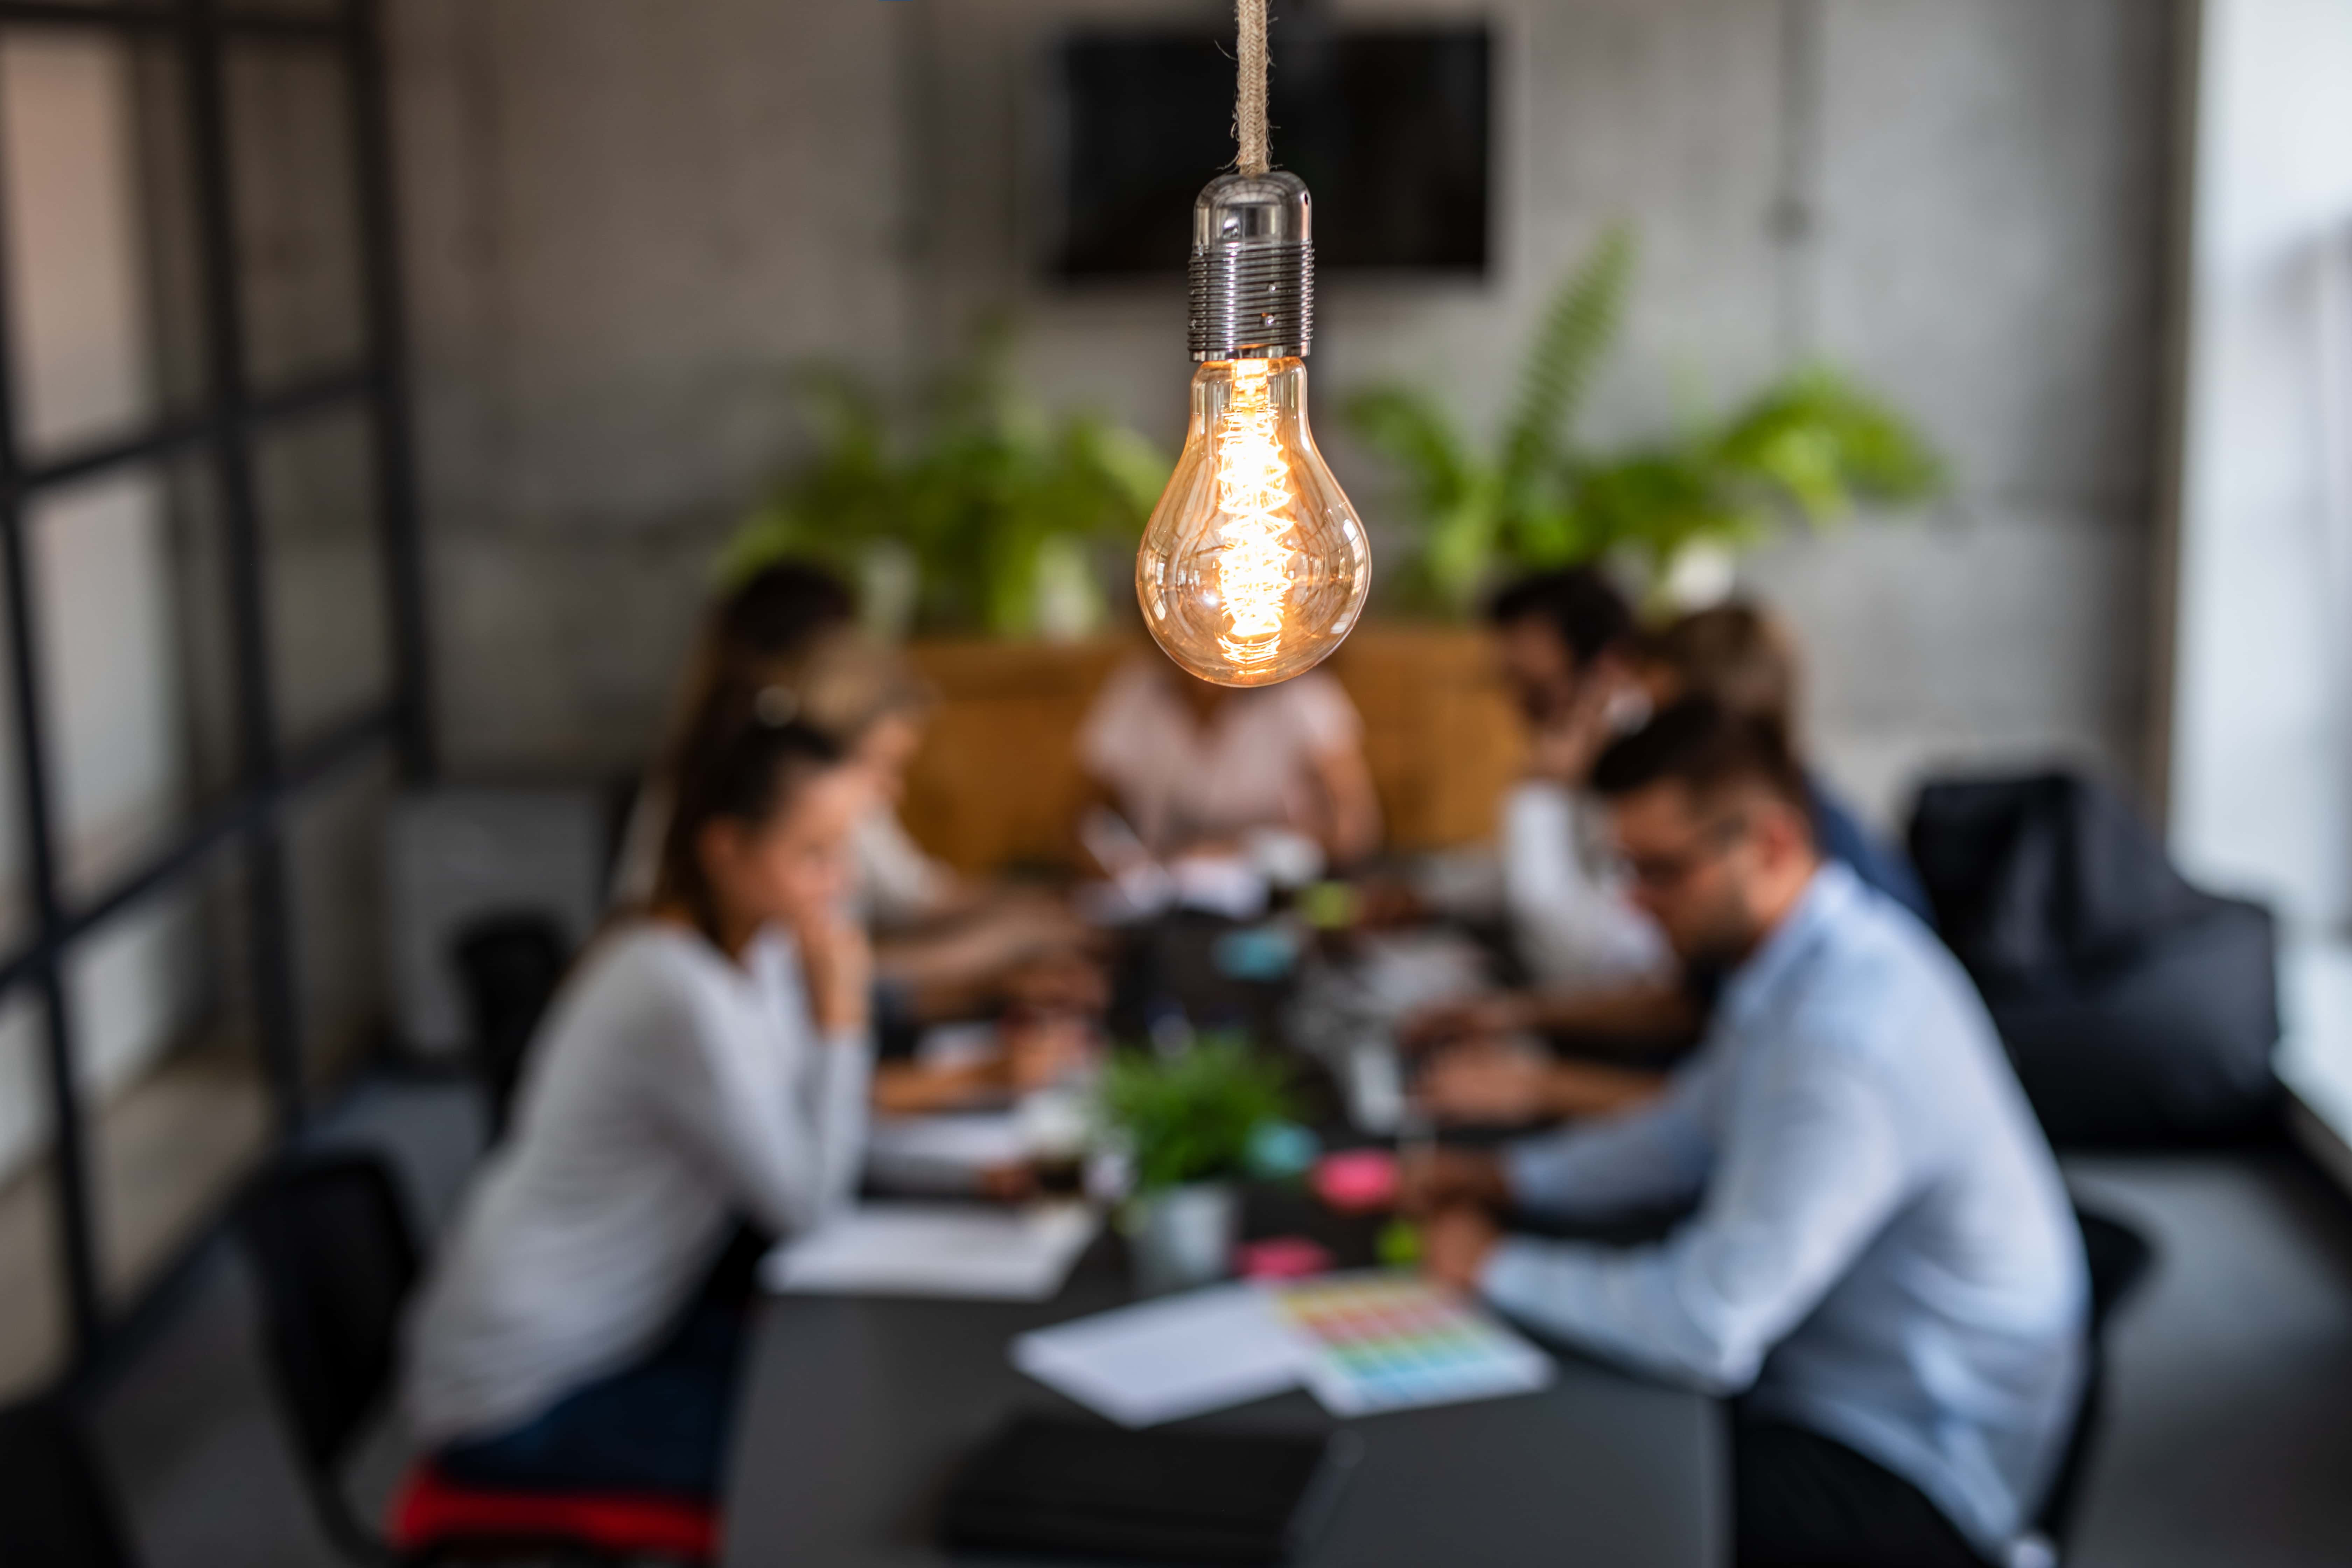 hanging lit lightbulb with blurred background of 5 people sitting around a conference room table with scattered papers on the table